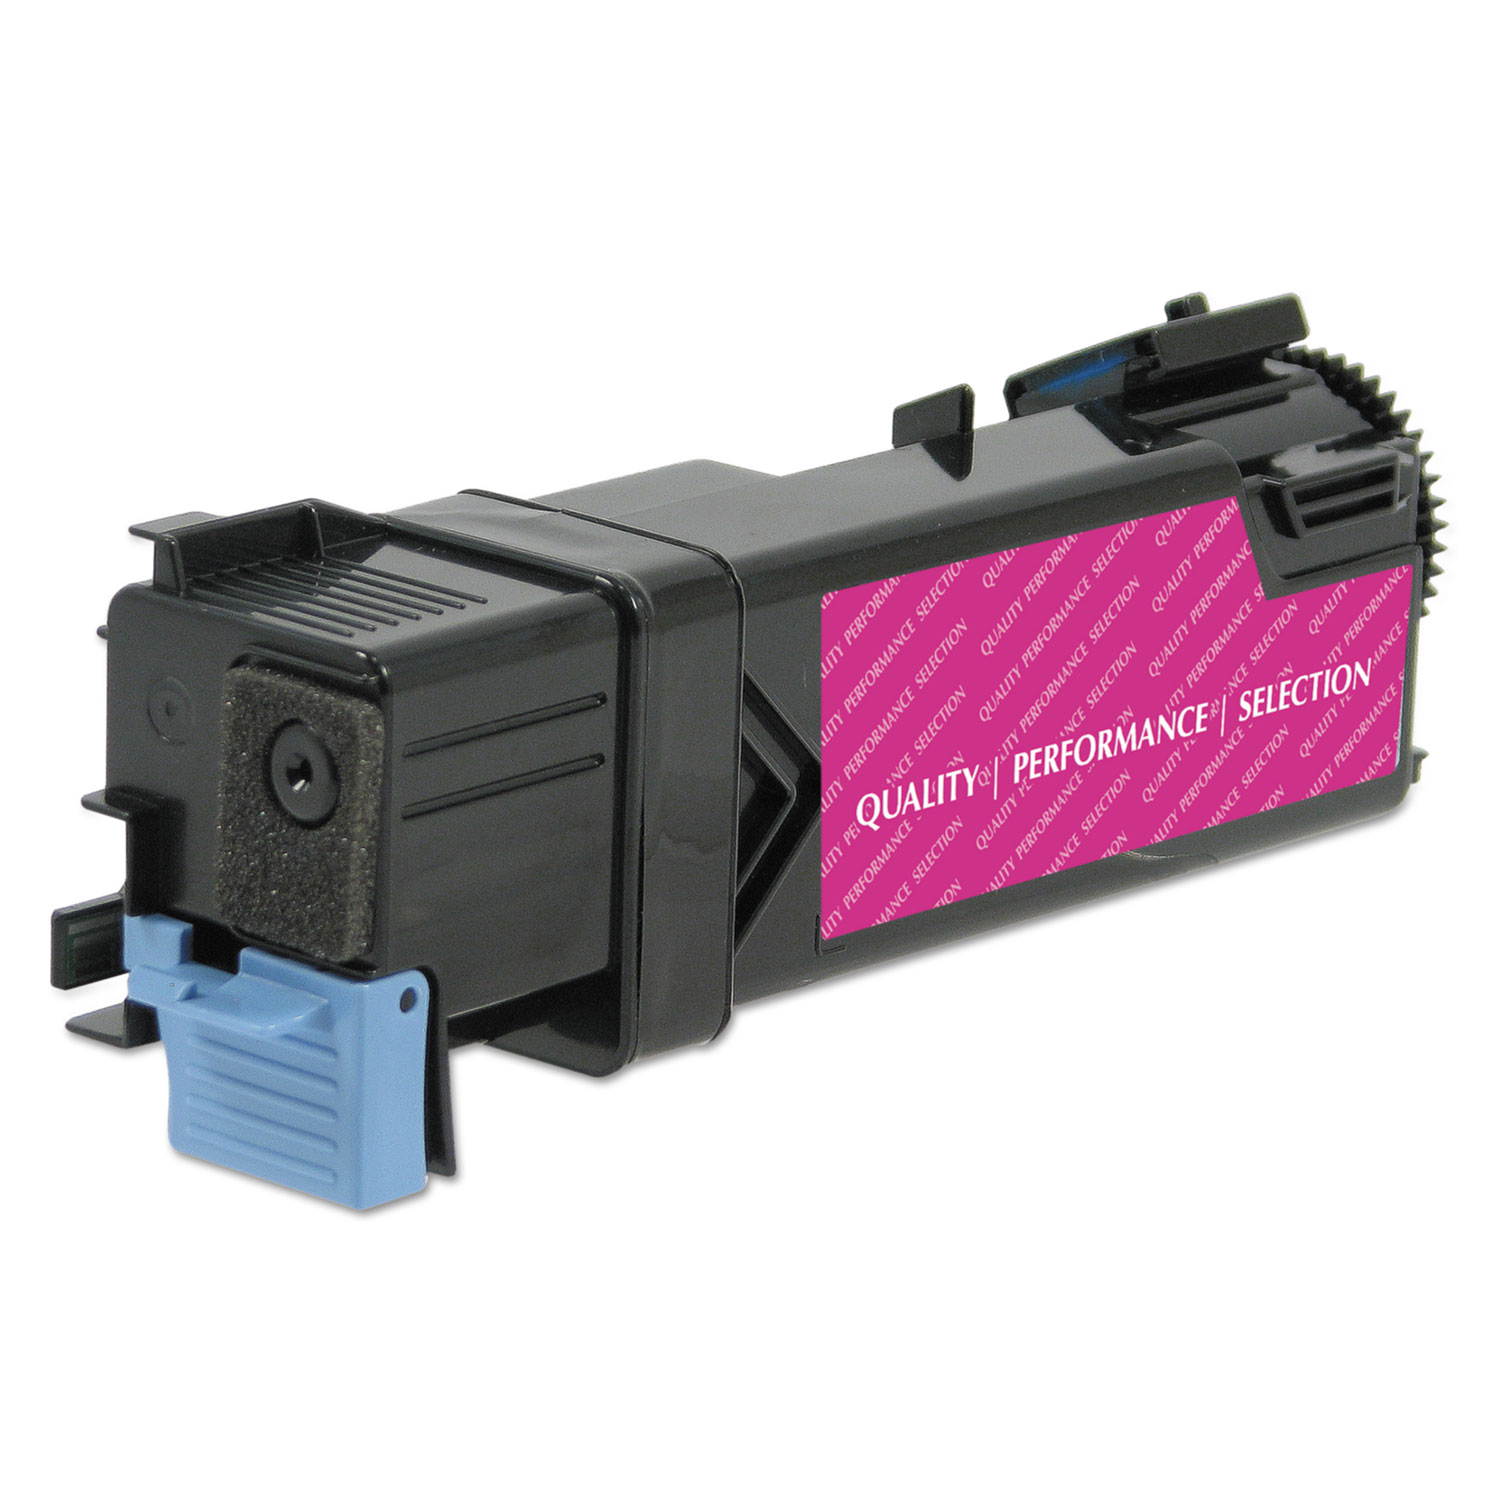  Innovera IVRD2150M Remanufactured 331-0717 (2150) High-Yield Toner, 2500 Page-Yield, Magenta (IVRD2150M) 